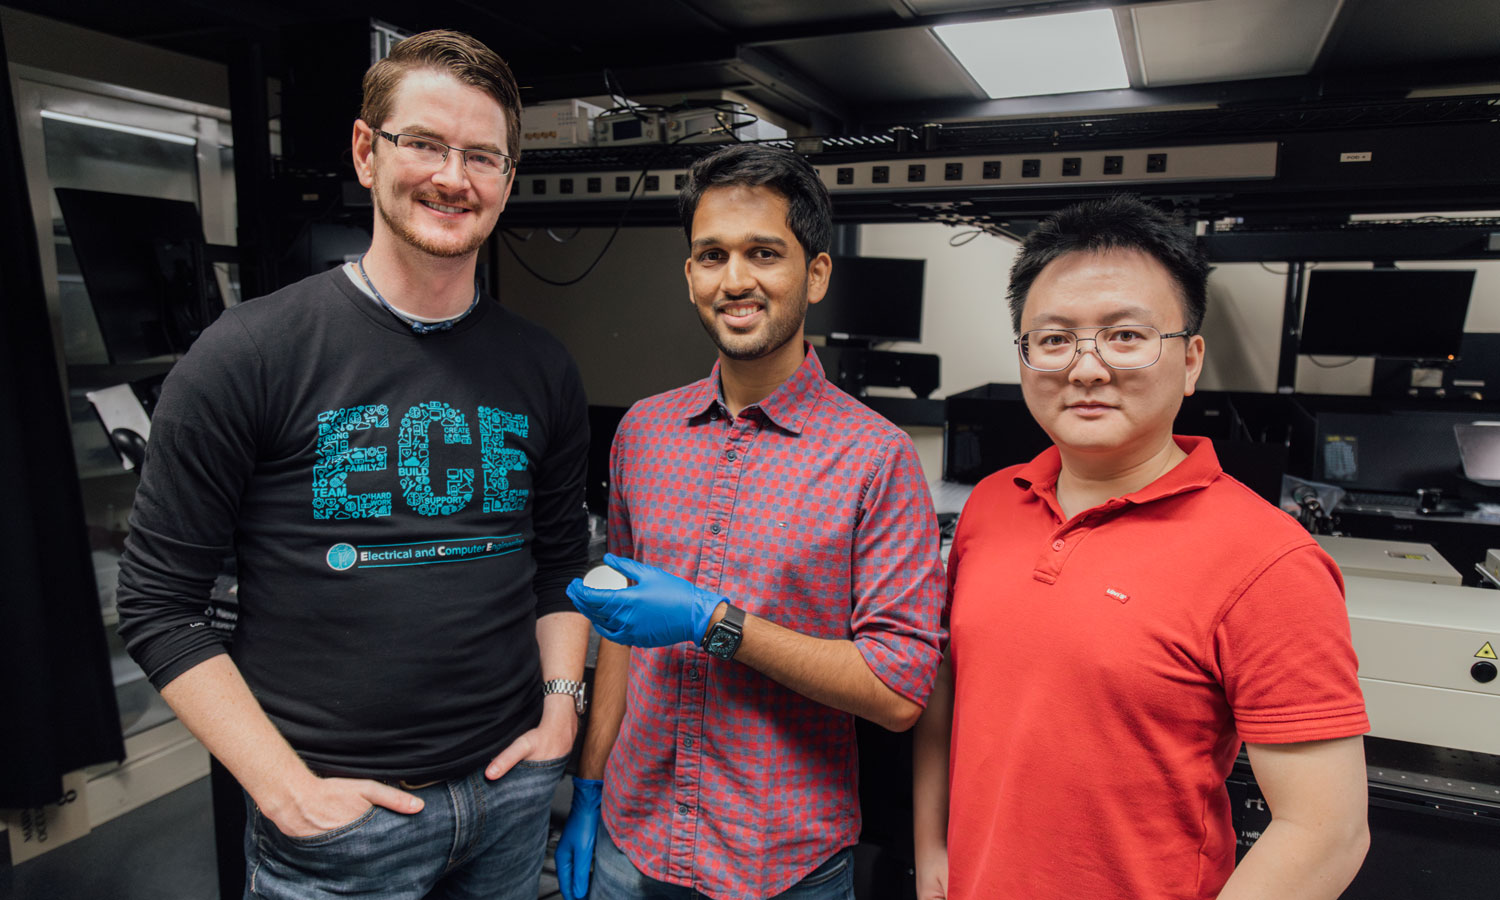 Nathaniel Kinsey, Ph.D., ECE professor, Dhruv Fomra, Ph.D., post doctoral researcher with the National Institute of Standards and Technology and Jingwei Wu, Ph.D.,  ECE research scientist.